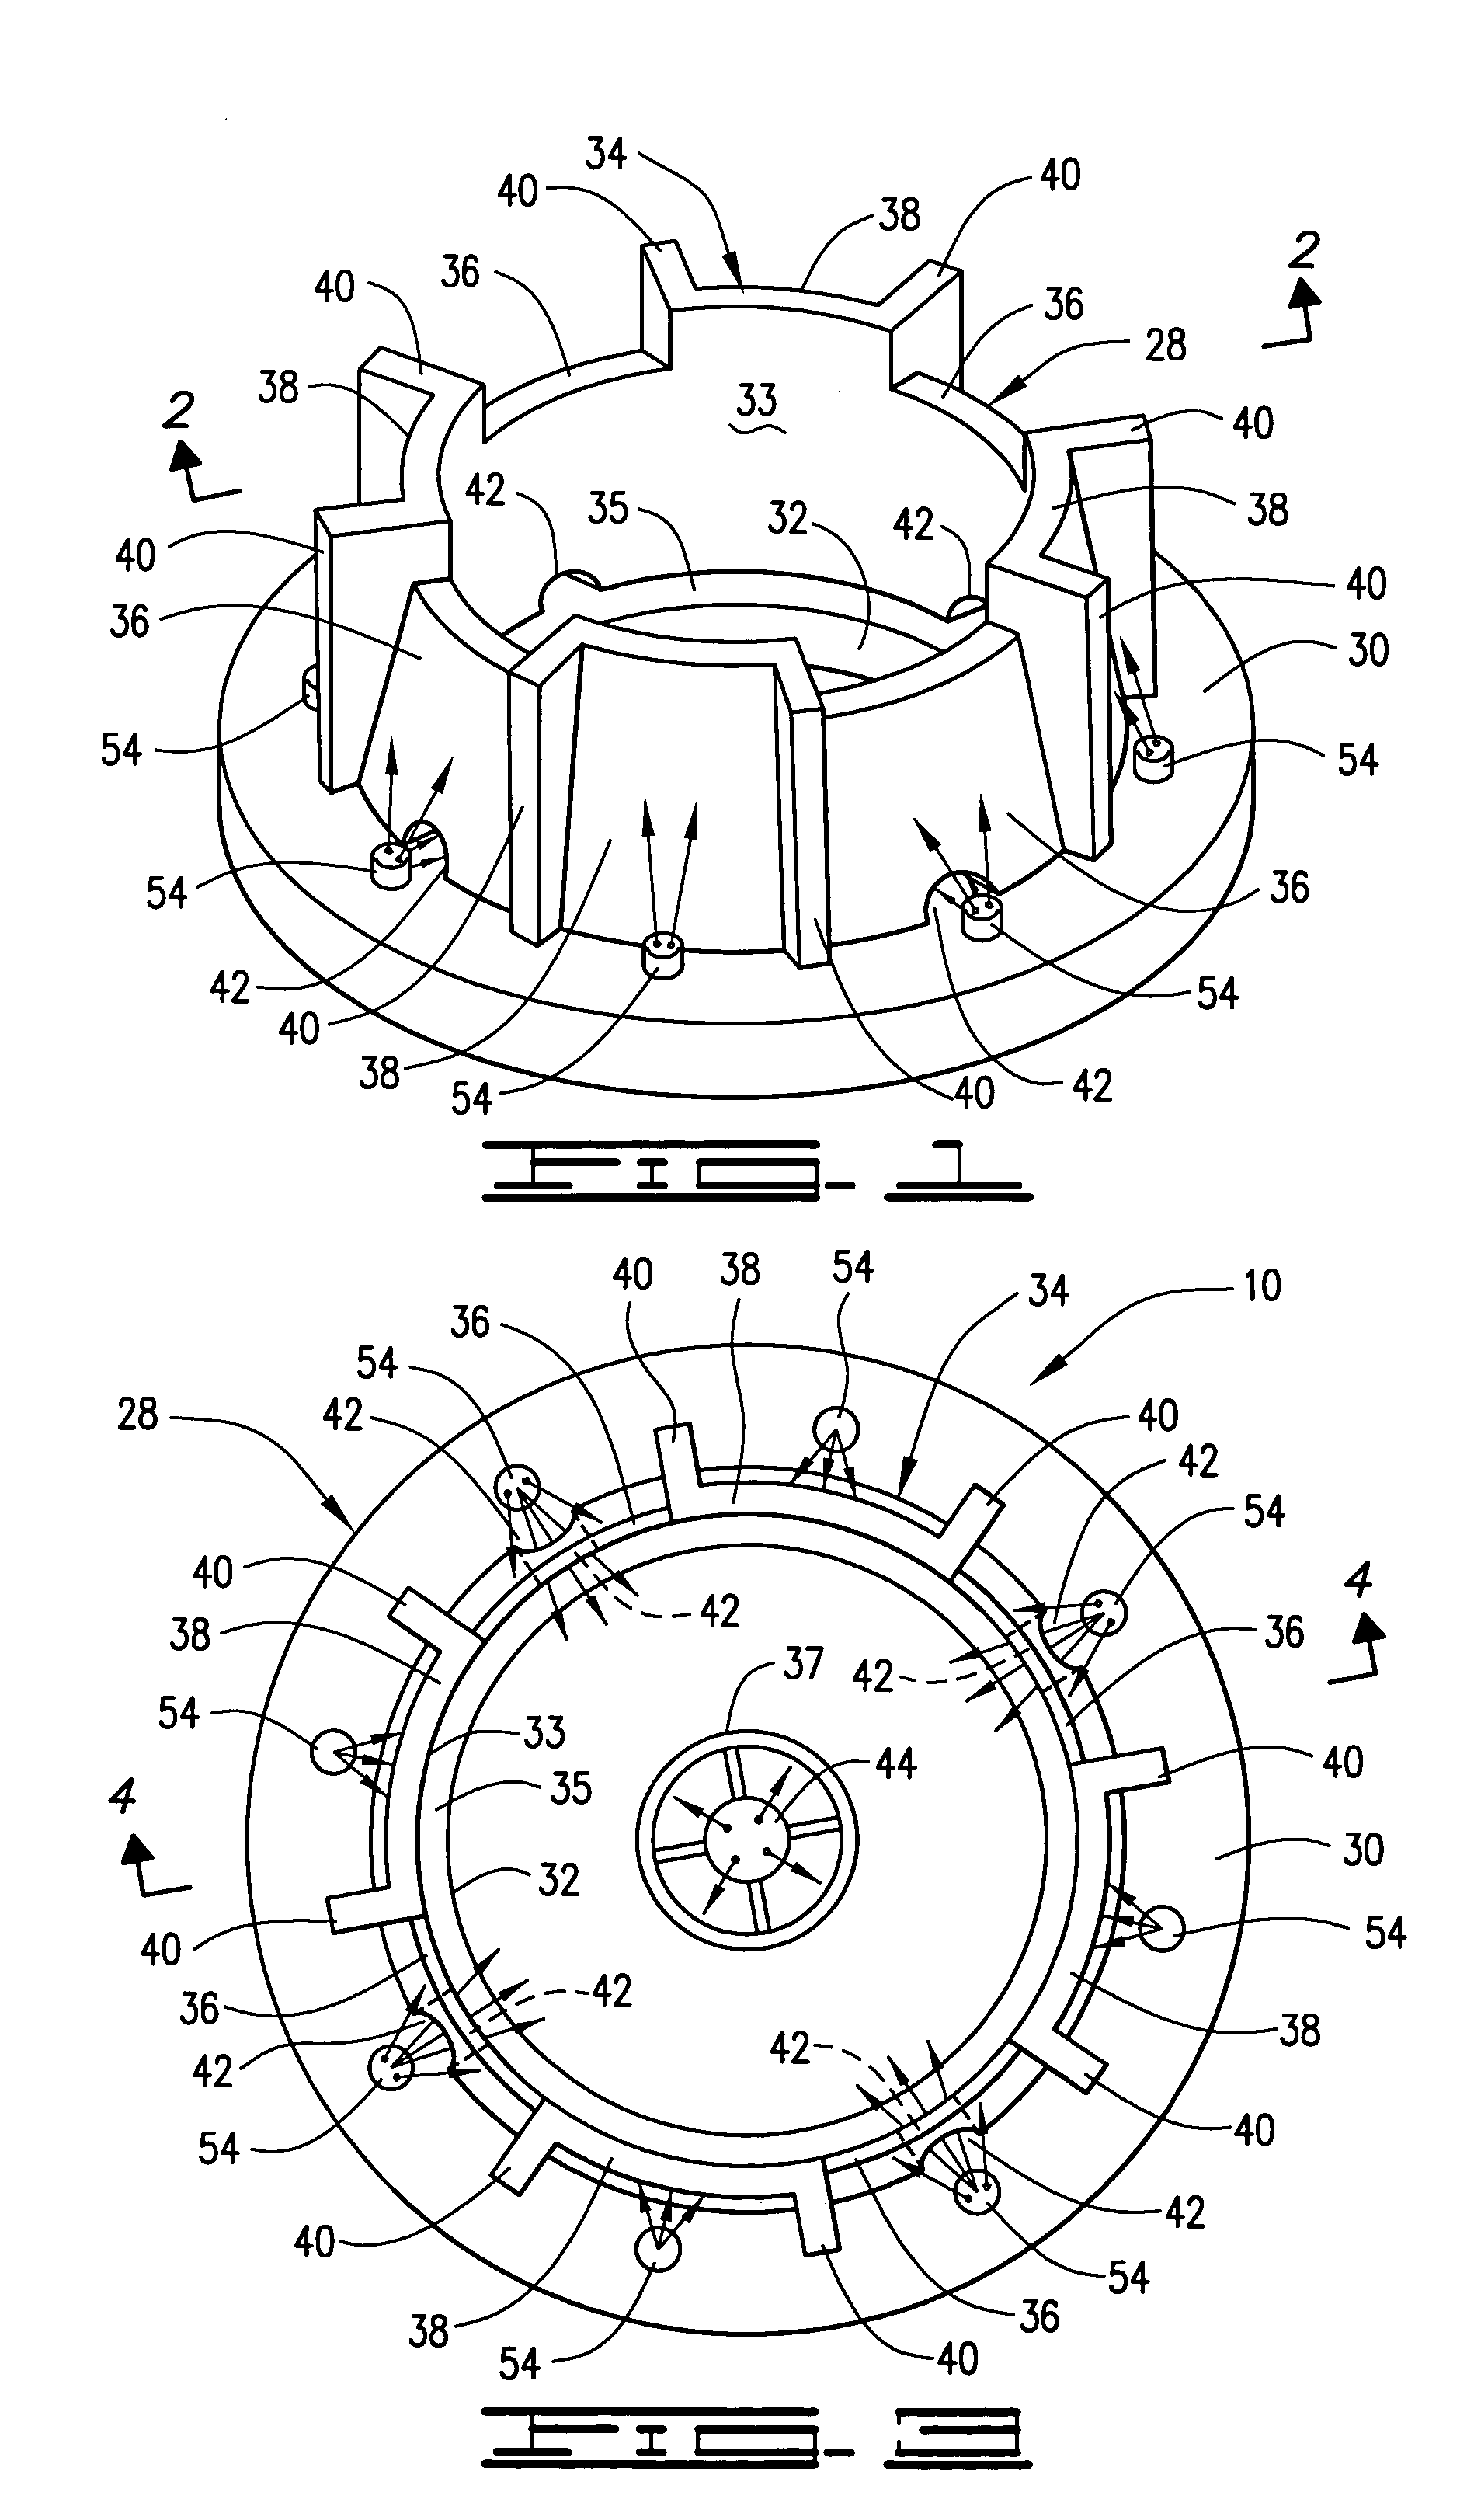 Compact low NOx gas burner apparatus and methods